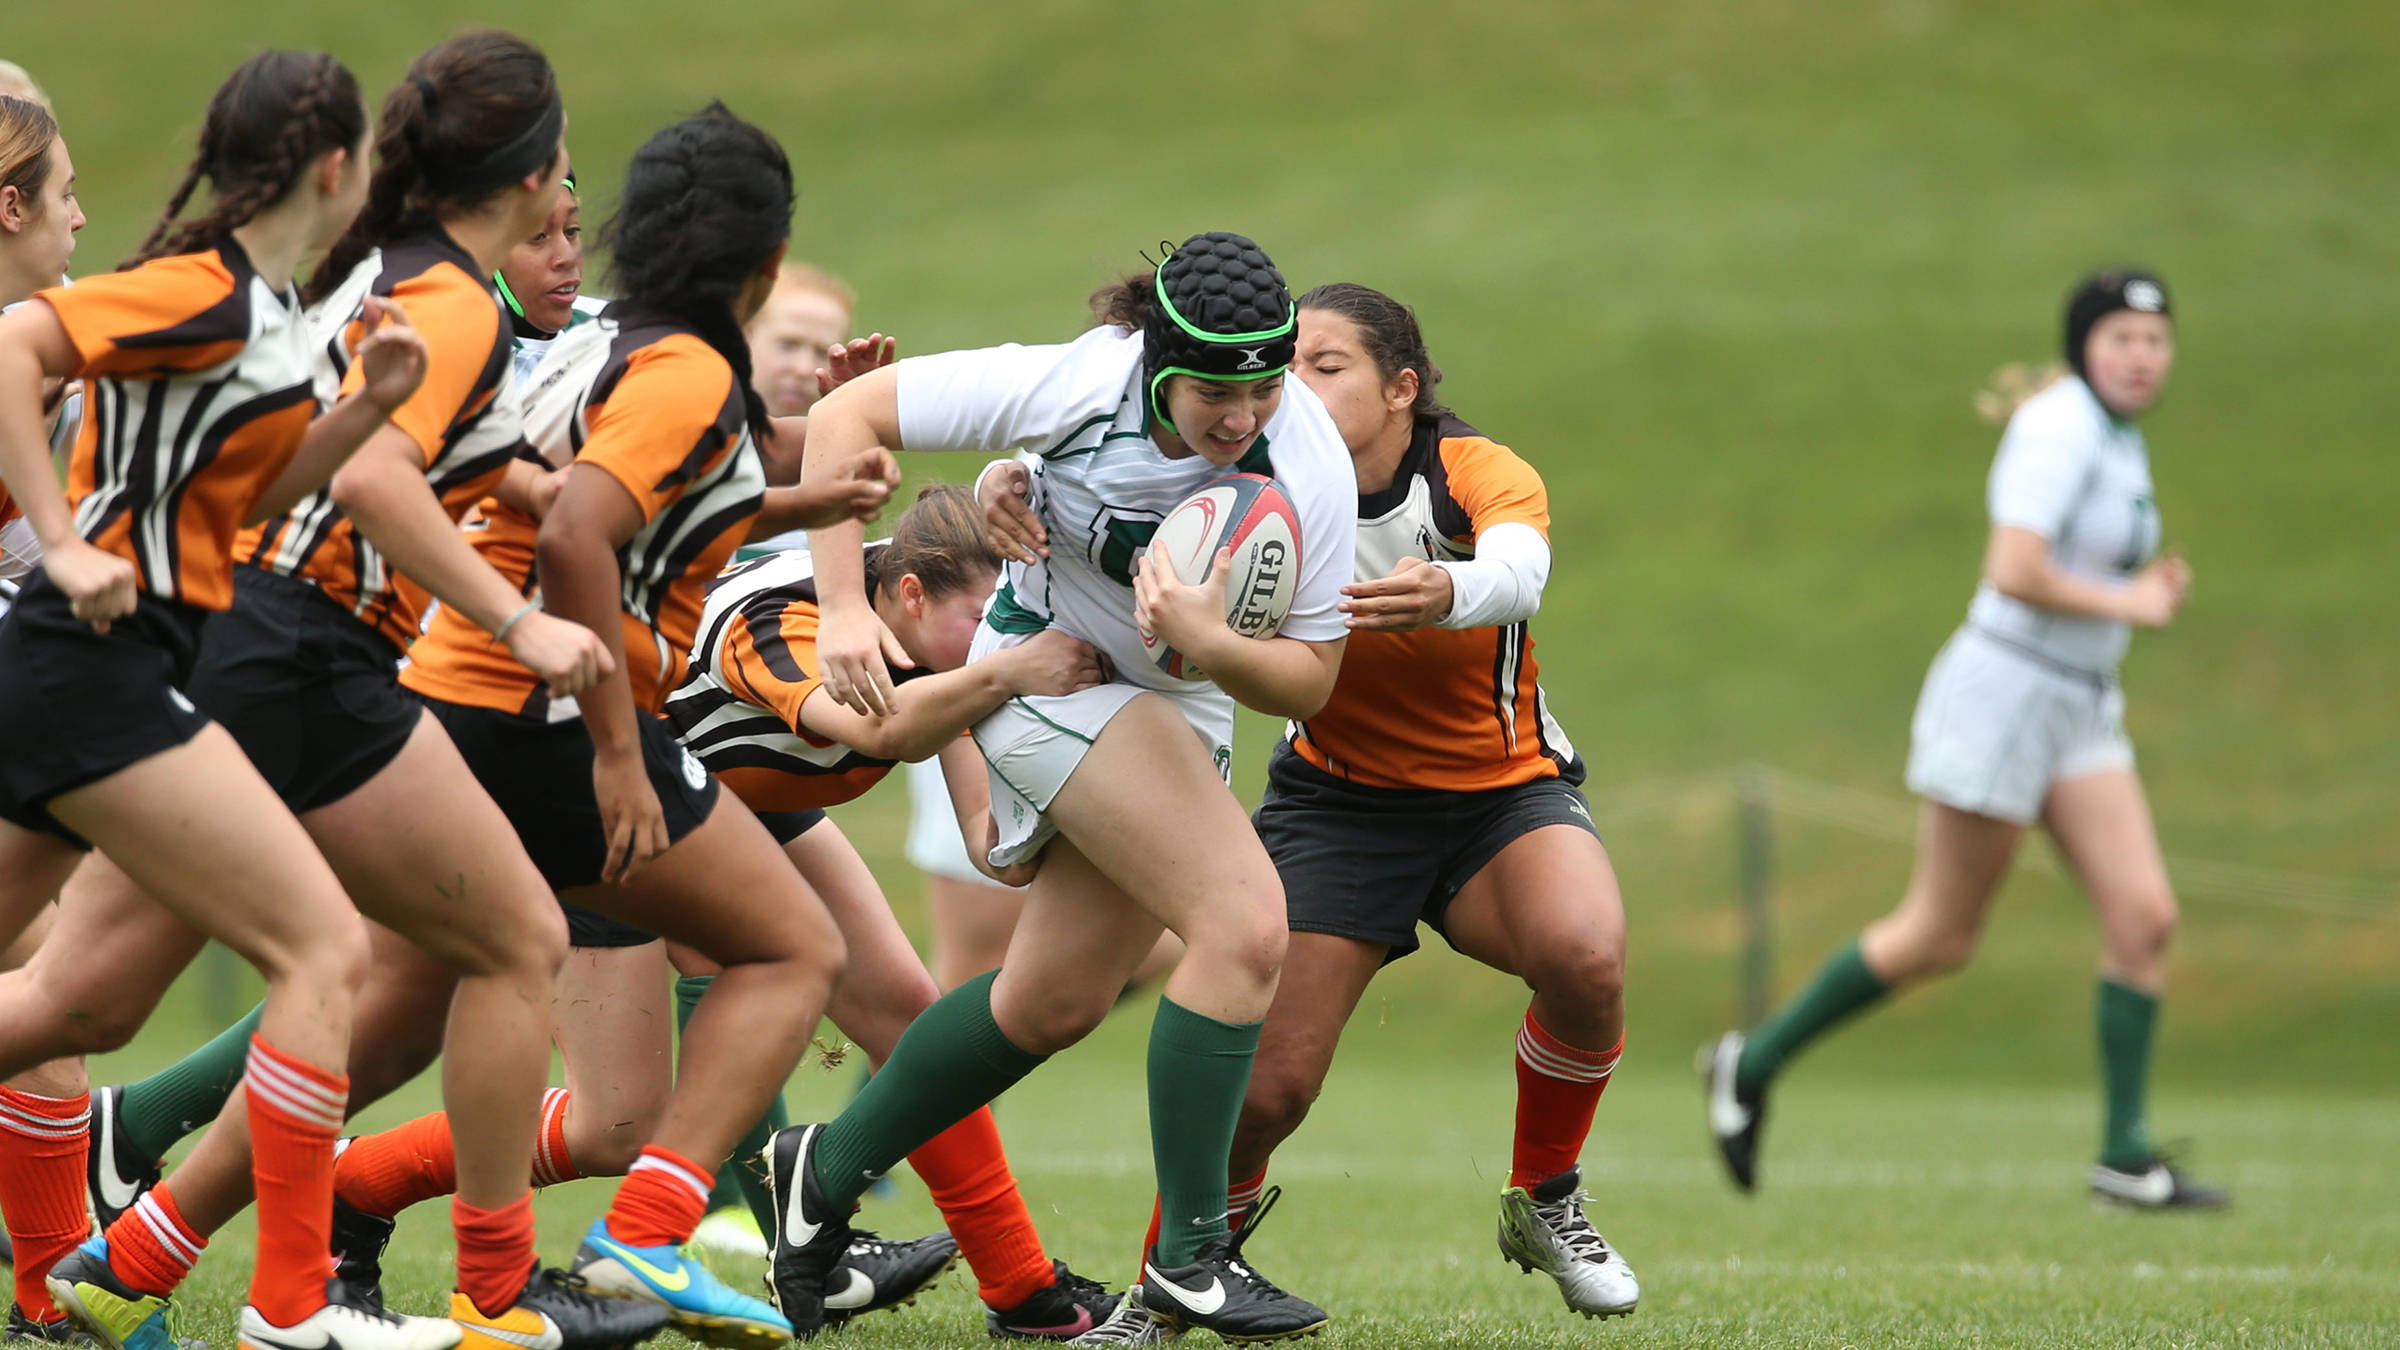 Dartmouth women’s rugby 57-0 over Princeton